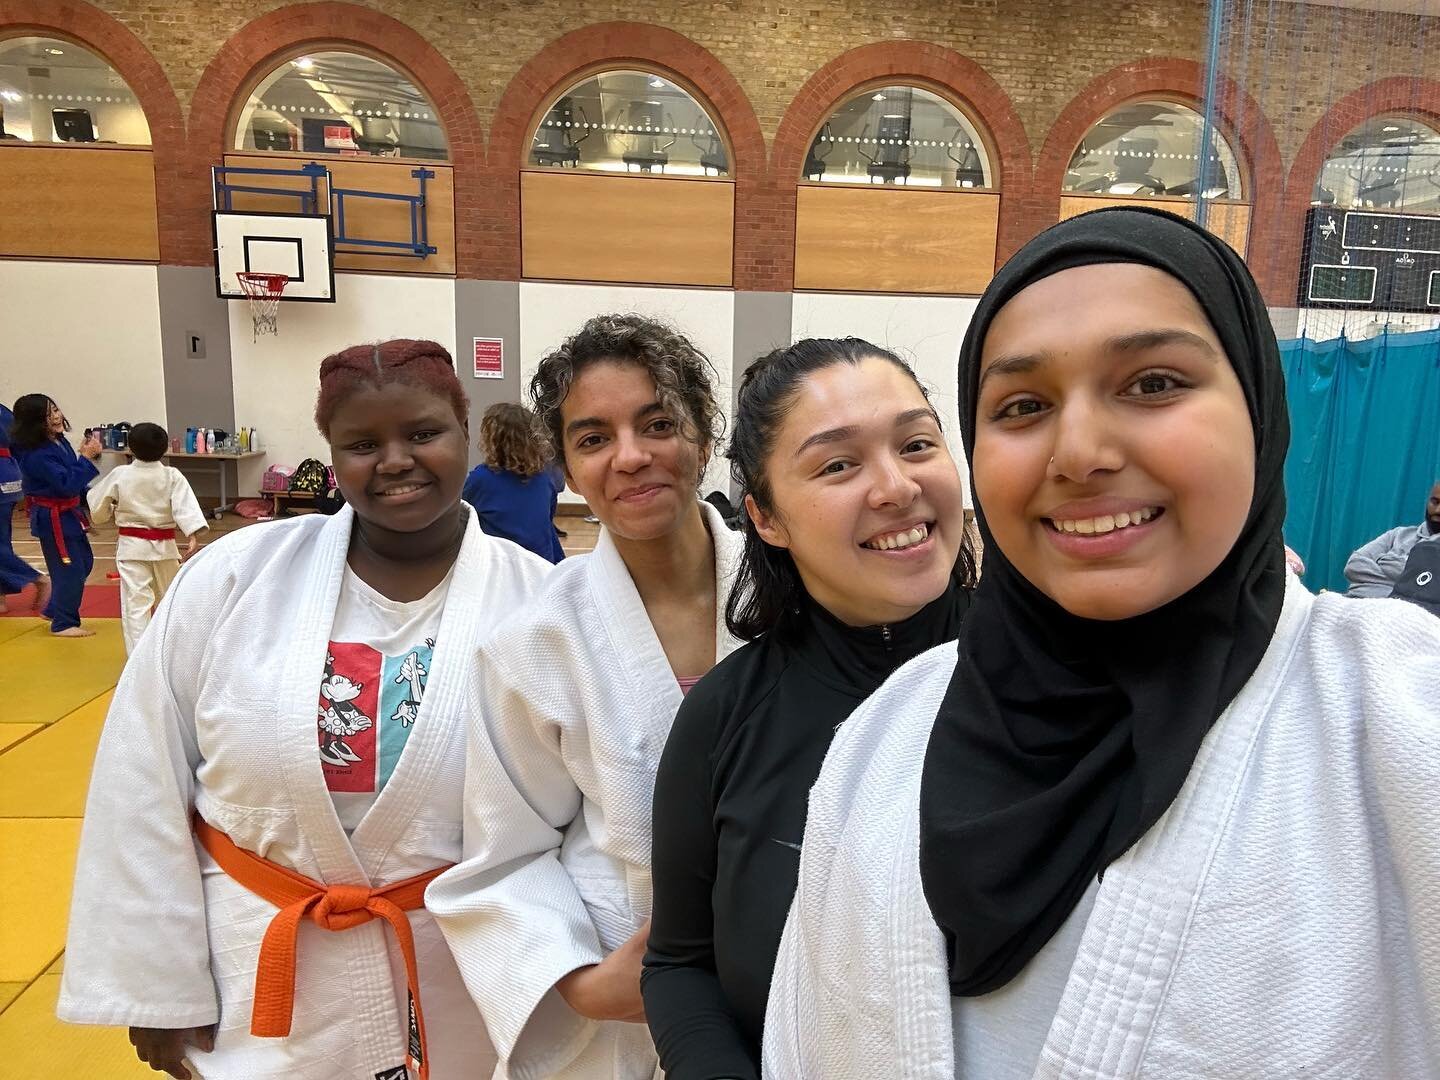 Today wouldn&rsquo;t be possible without my dream team, thanks again girls for all your help coaching ❤️

#judo #judowomen #judocoach #coach #martialarts #newham #dreamteam